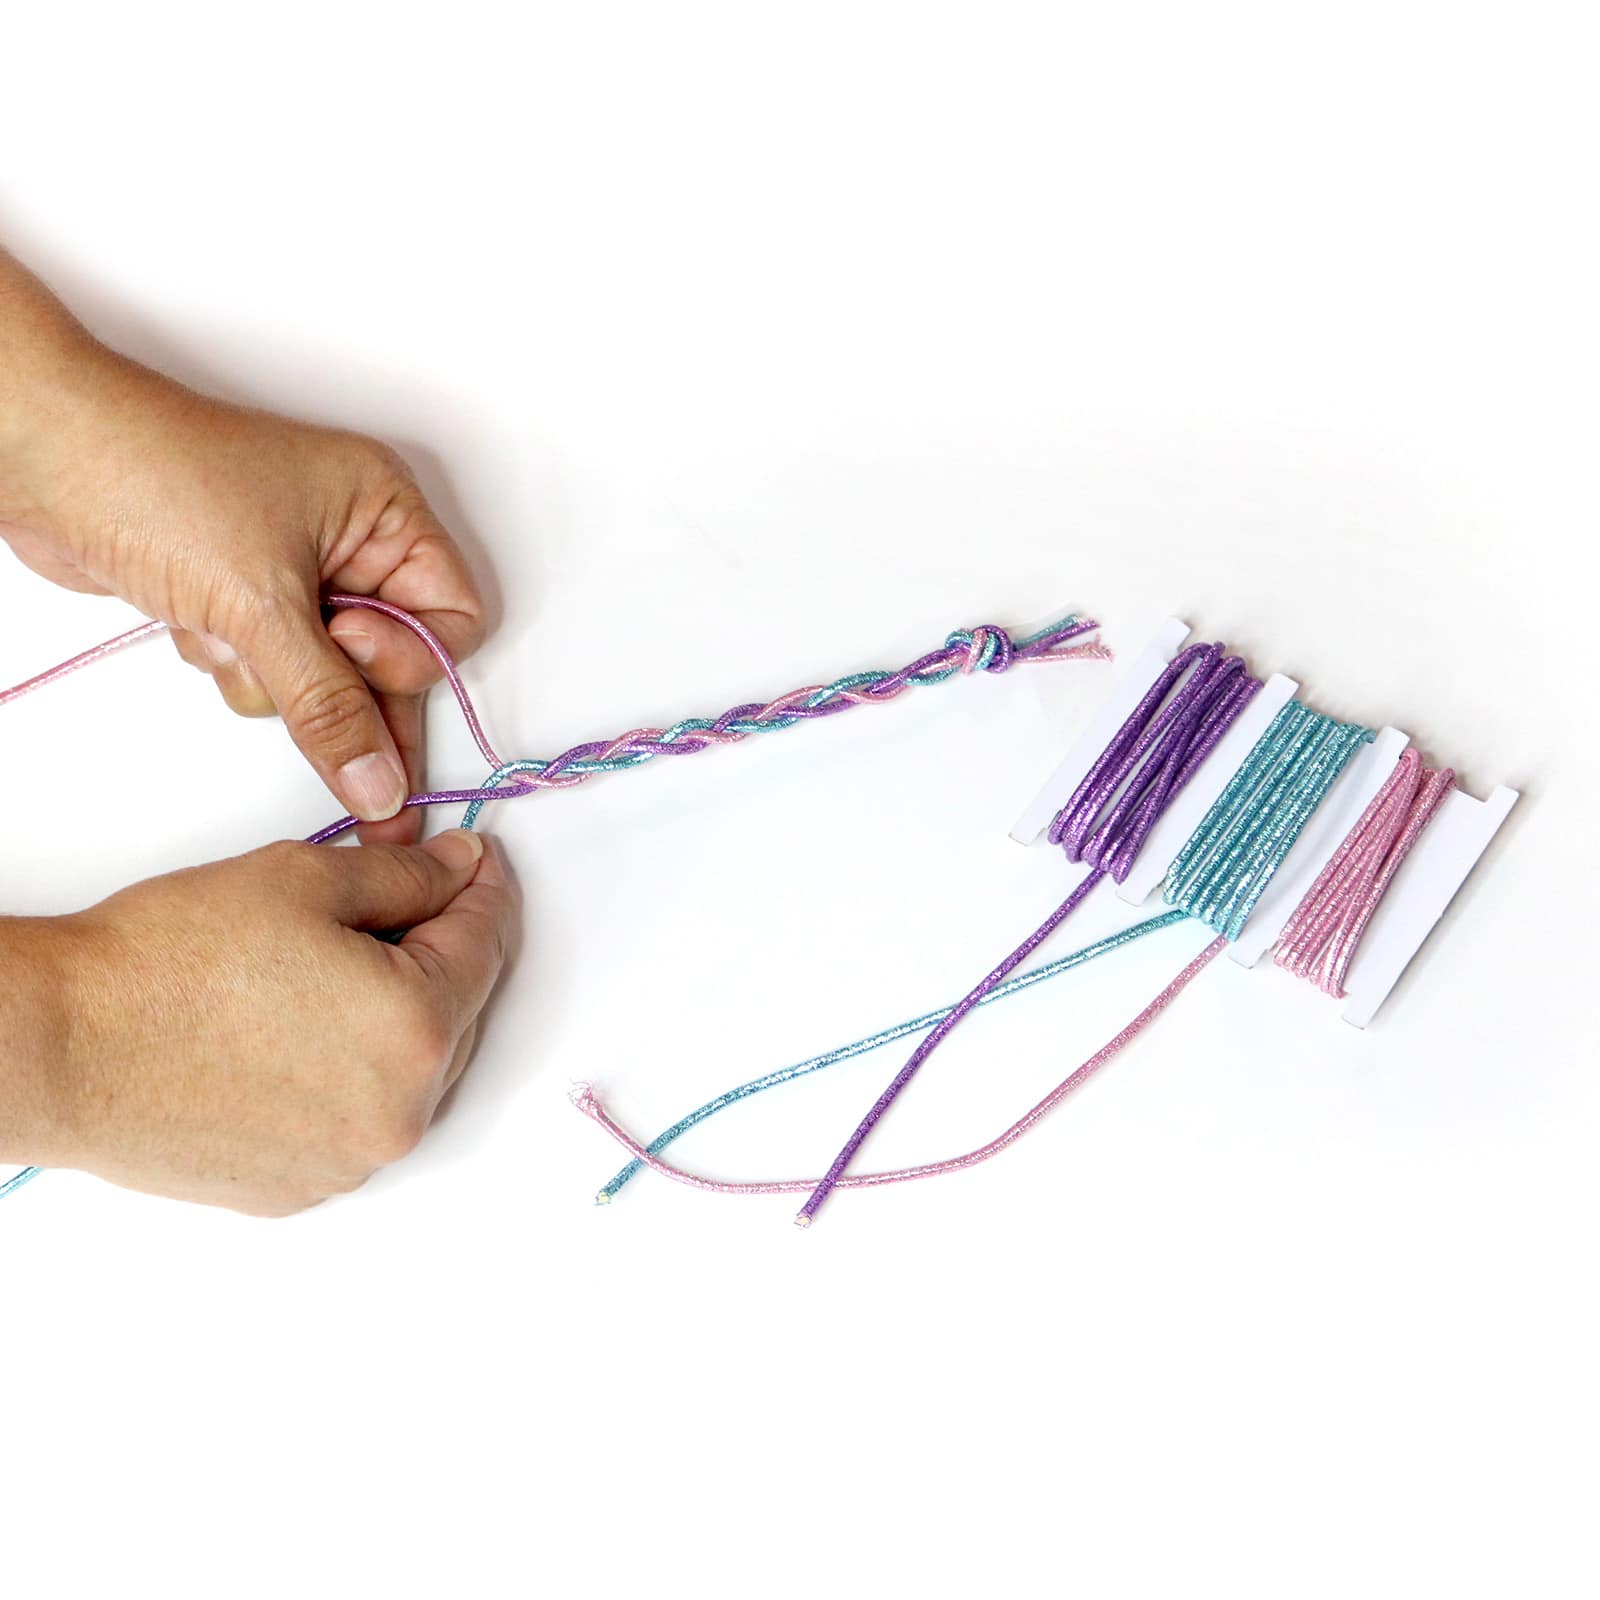 Unicorn Thick Elastic Cord Pack by Creatology&#x2122;